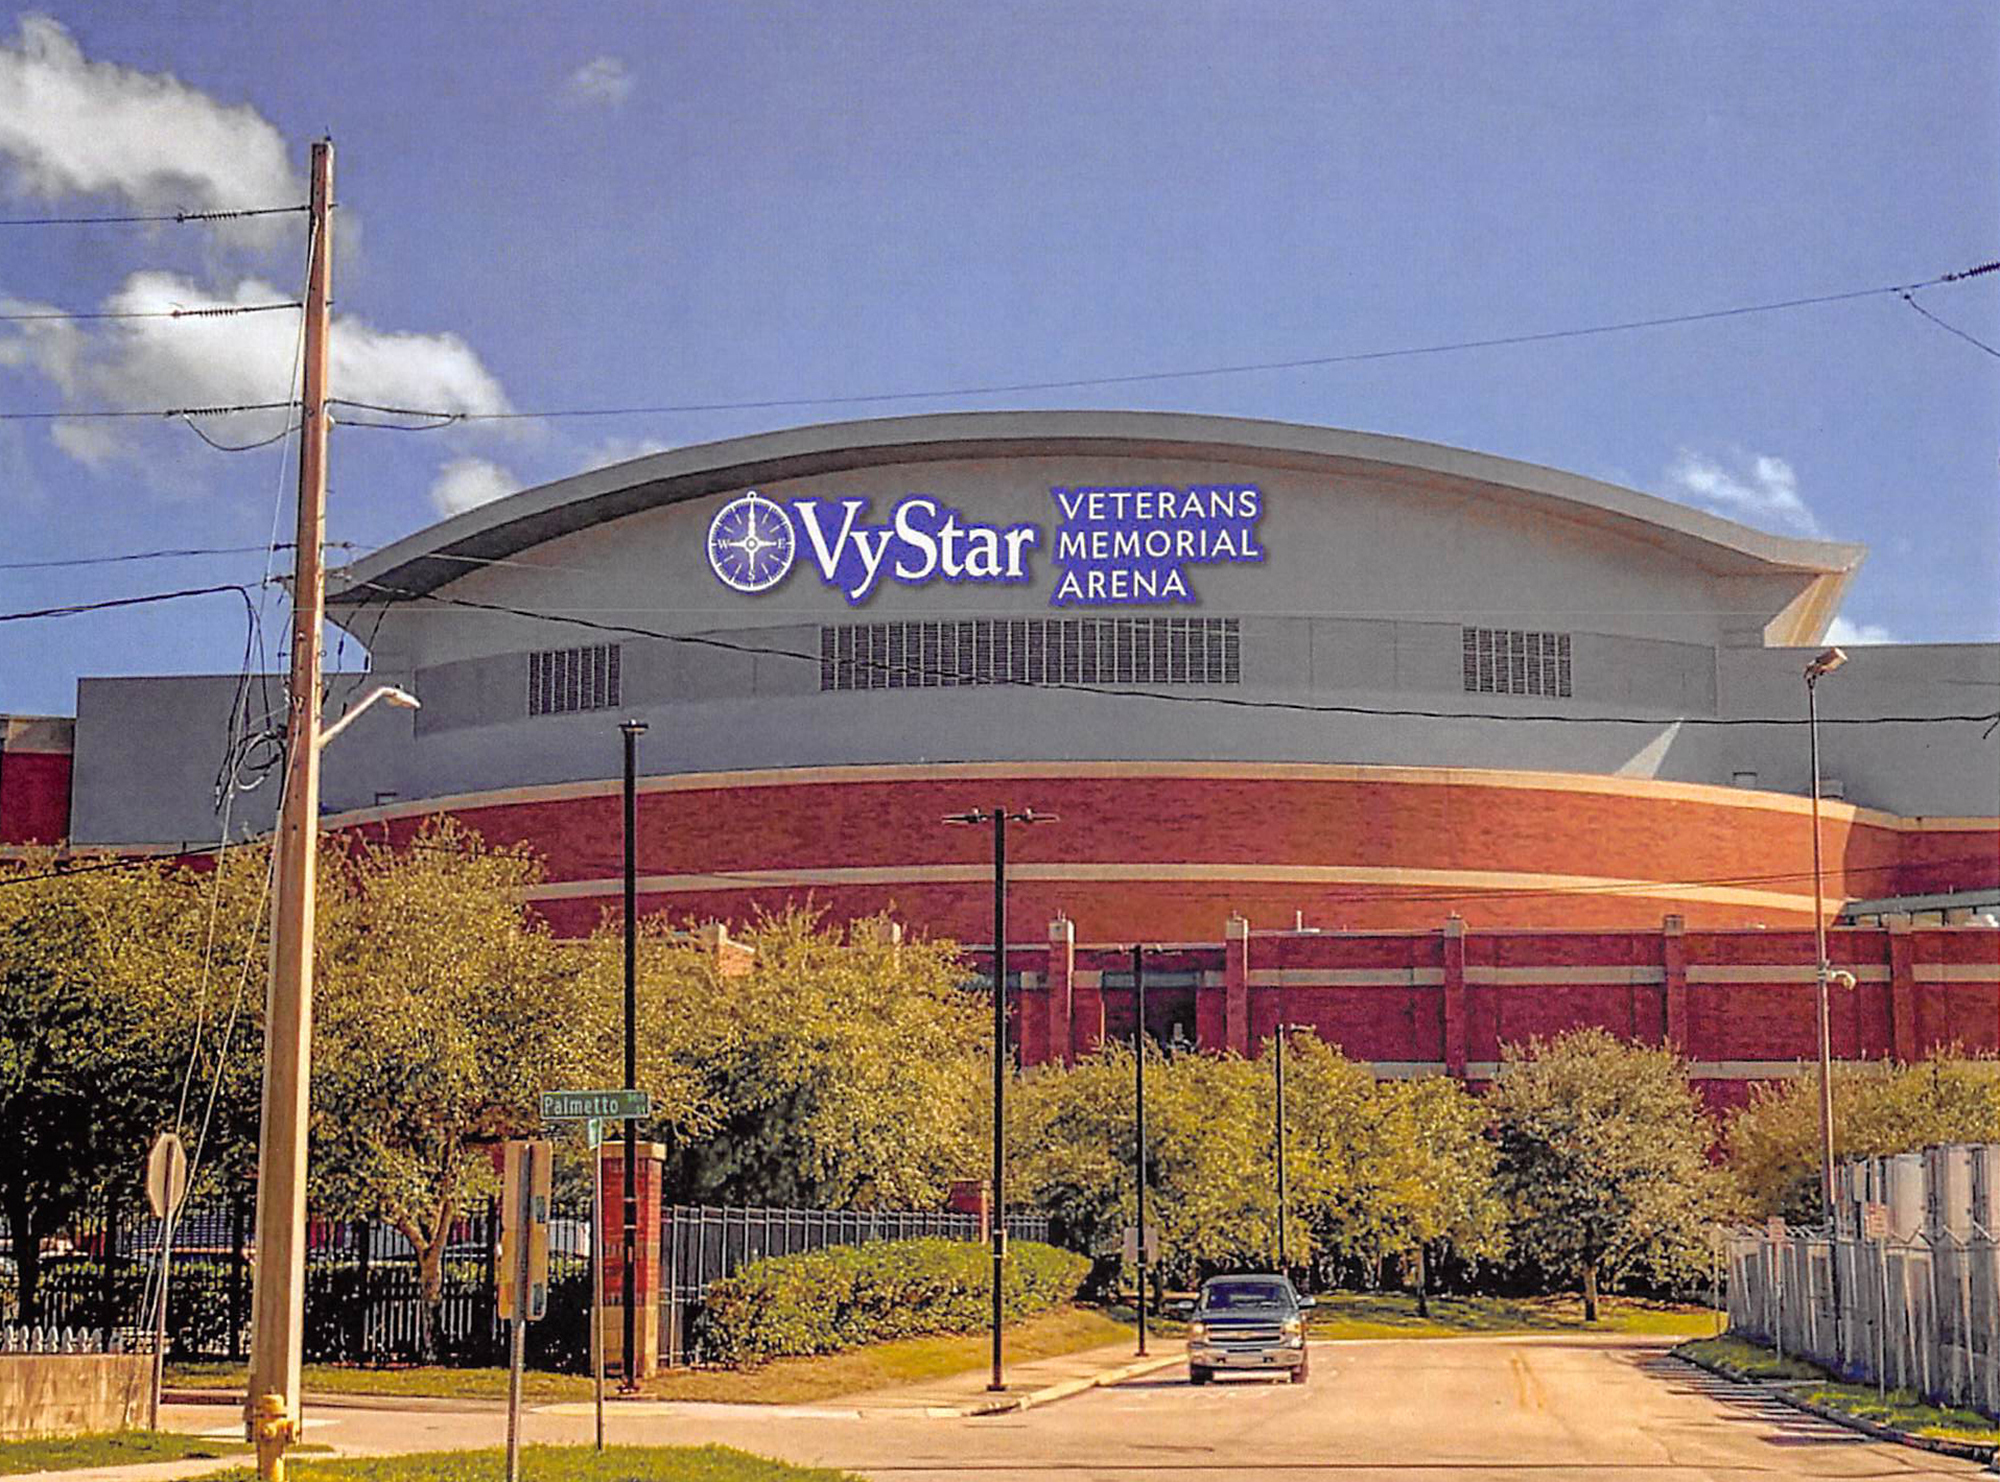 VyStar is seeking City Council approval to put its name on the Jacksonville Veterans Memorial Arena.